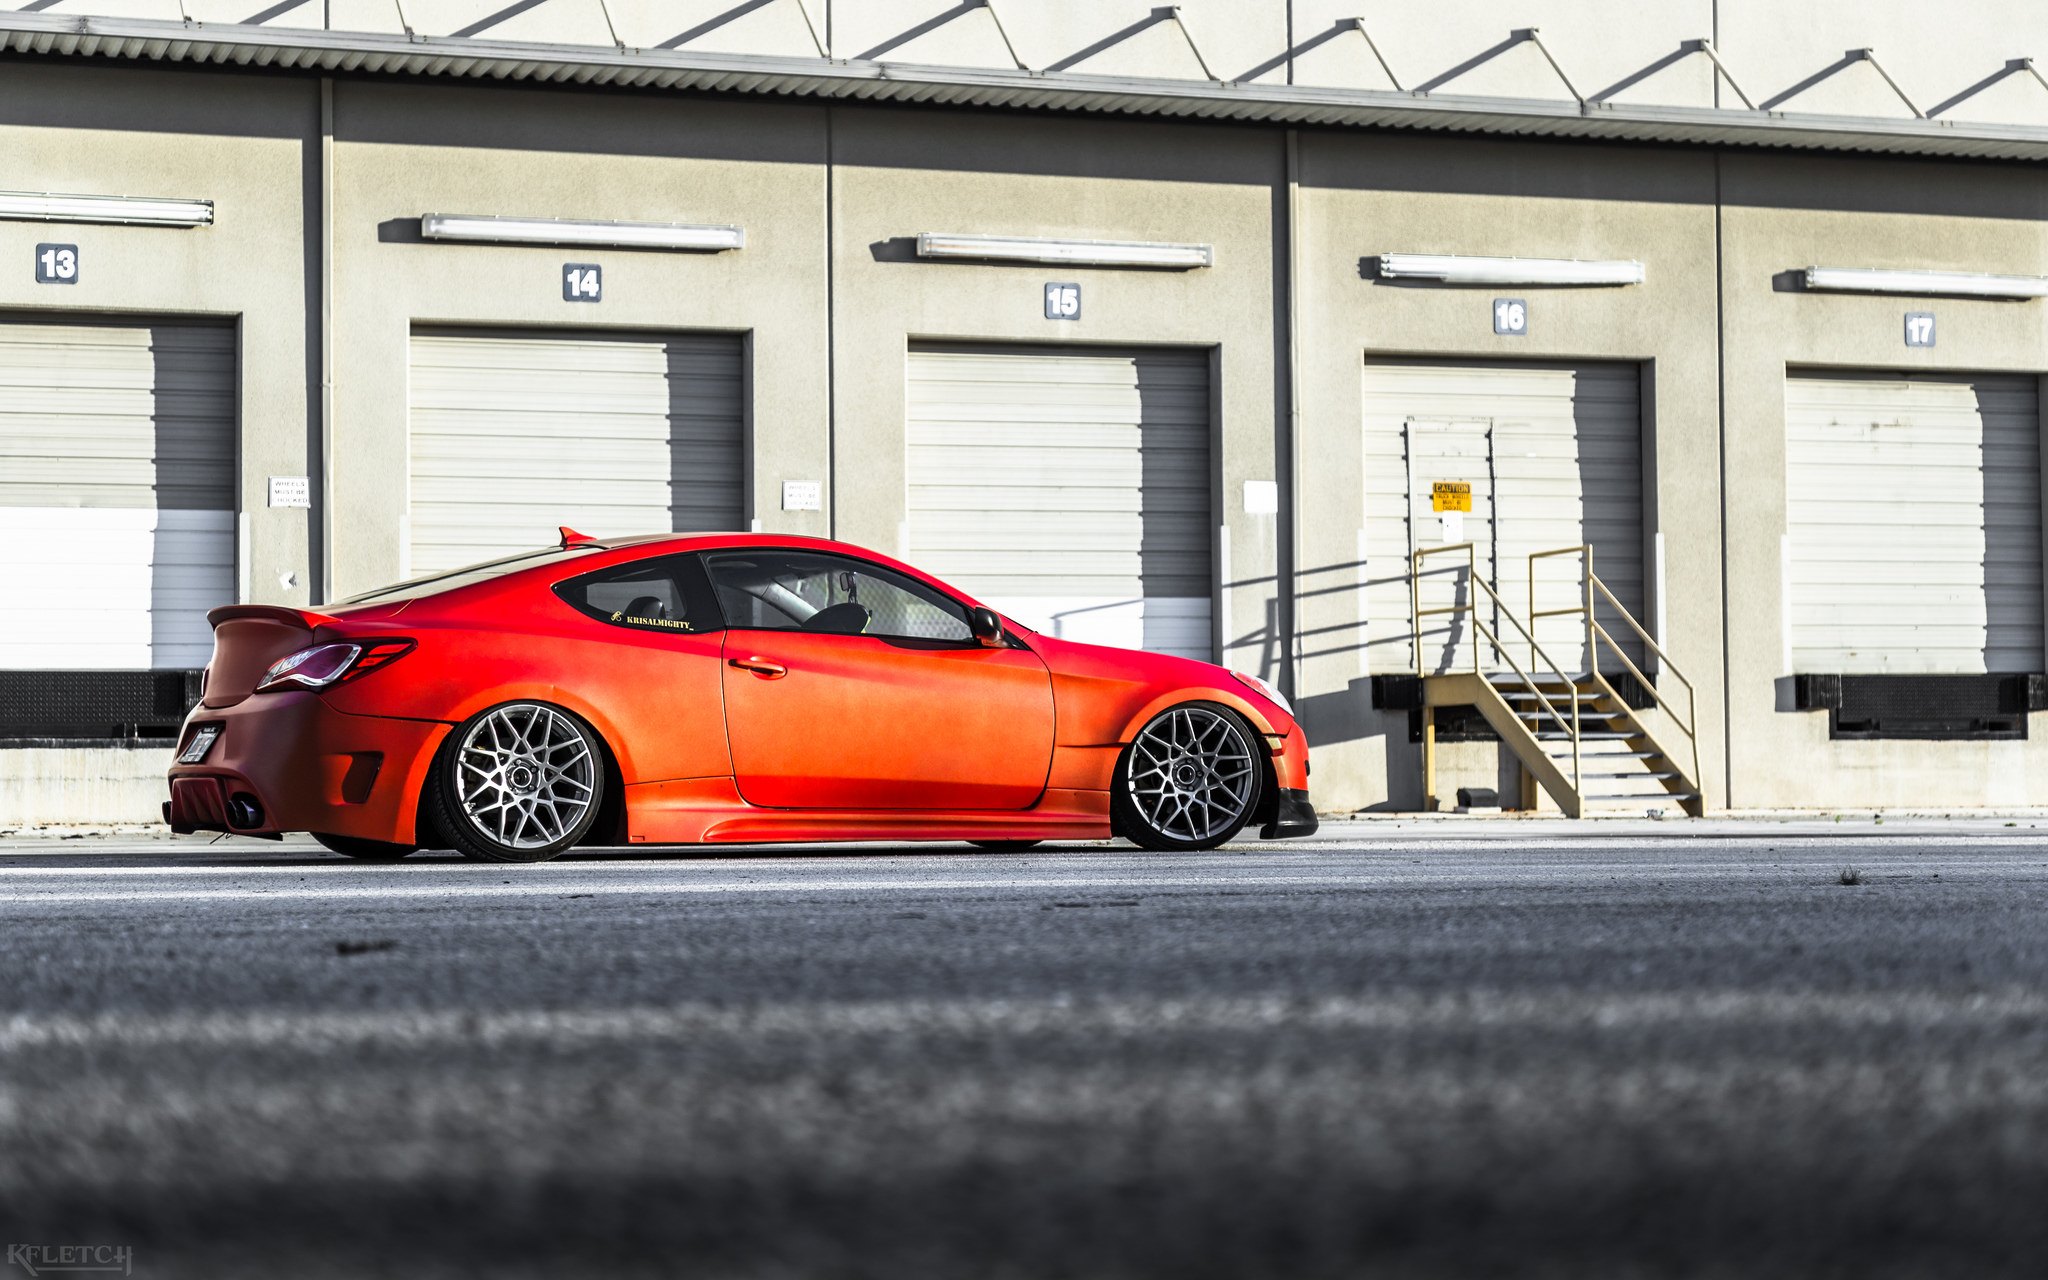 Incurve Rims with Brembo Brakes on Red Hyundai Genesis Coupe - Photo by kyle Fletcher